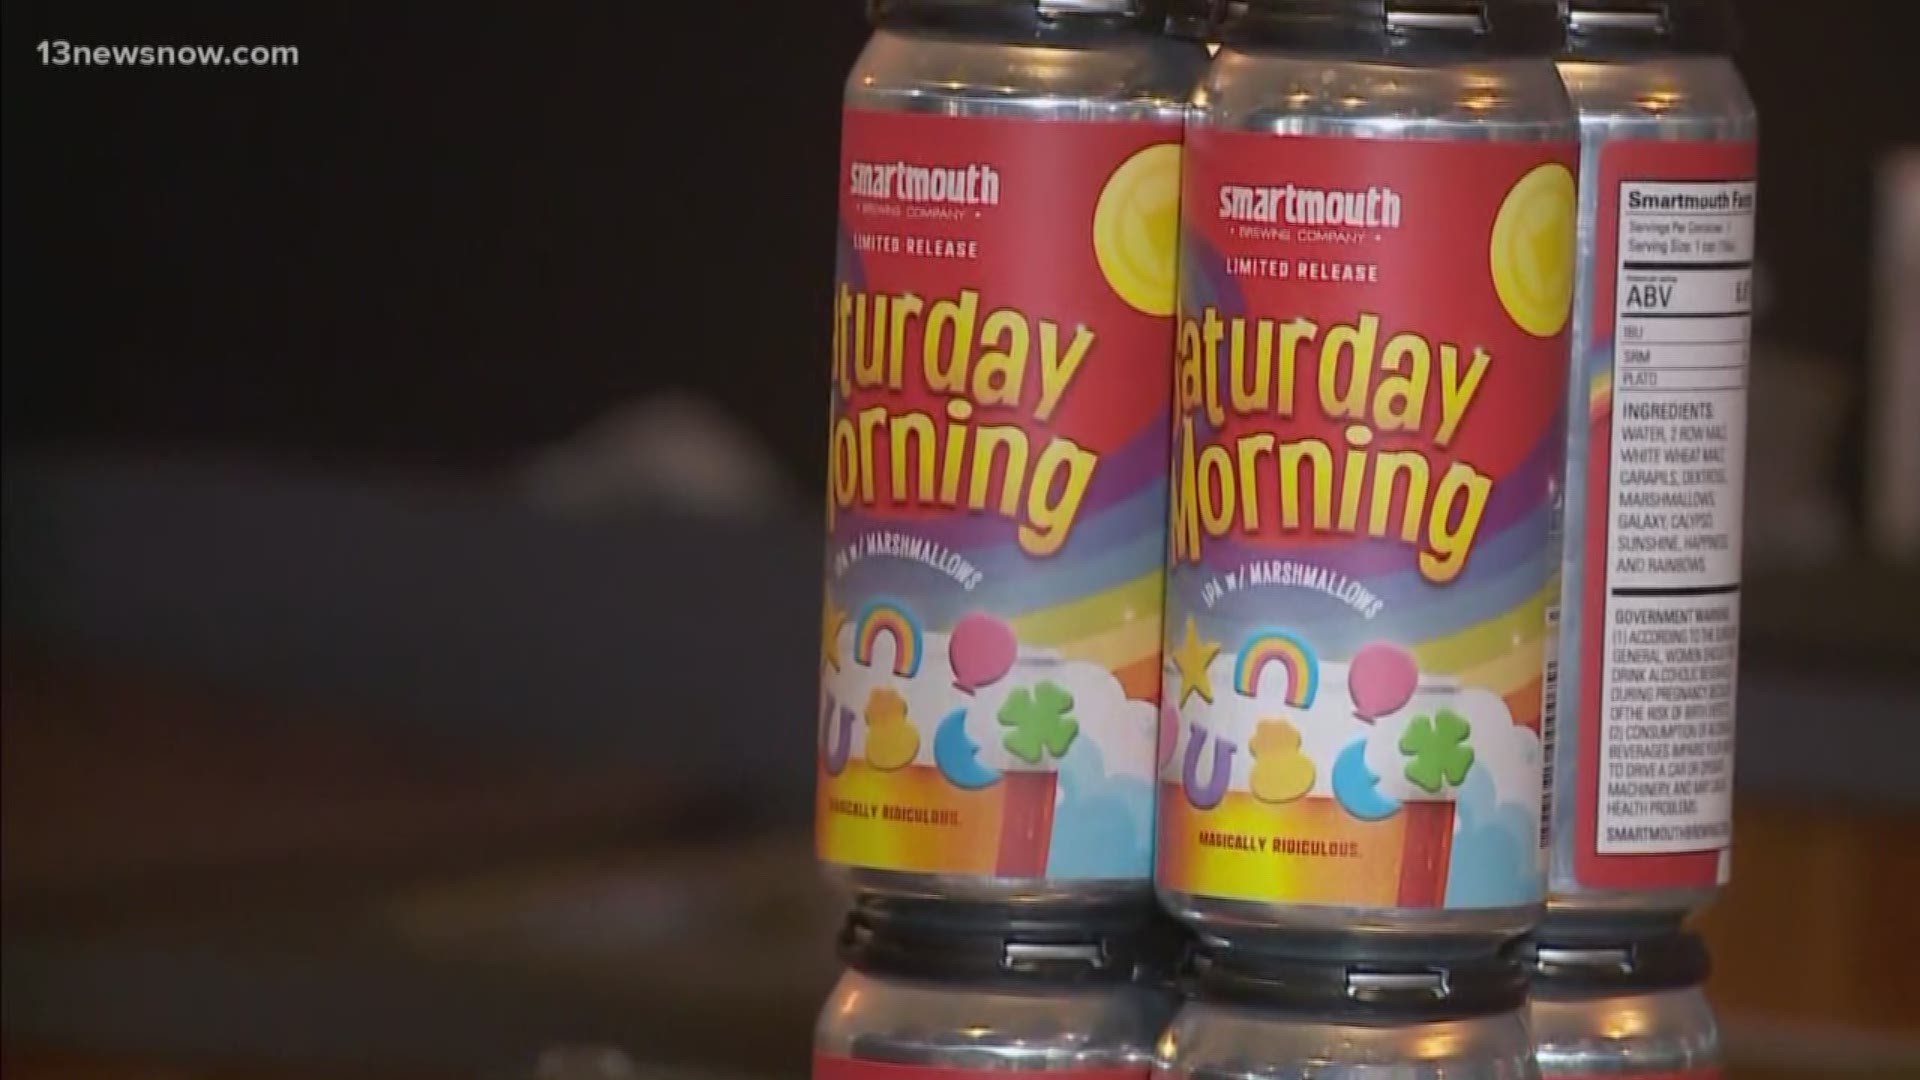 Smartmouth Brewing Company creates Lucky Charms-inspired beer -- it's an IPA and called "Saturday Morning."